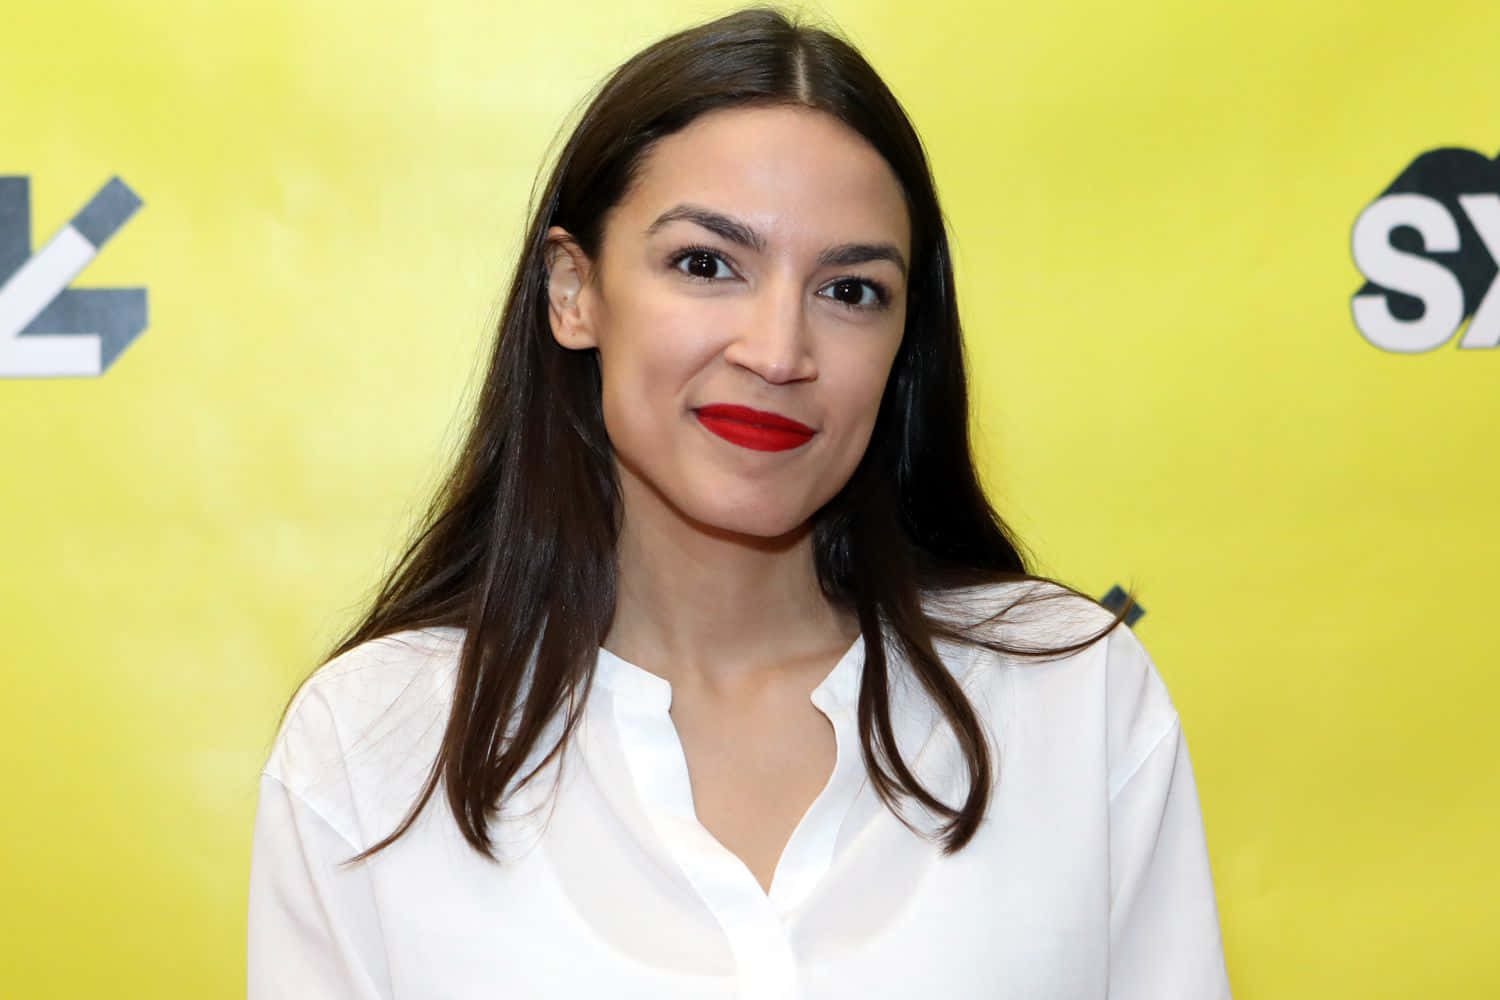 Alexandria Ocasio-Cortez, Vibrantly Posed Against a Yellow Backdrop Wallpaper